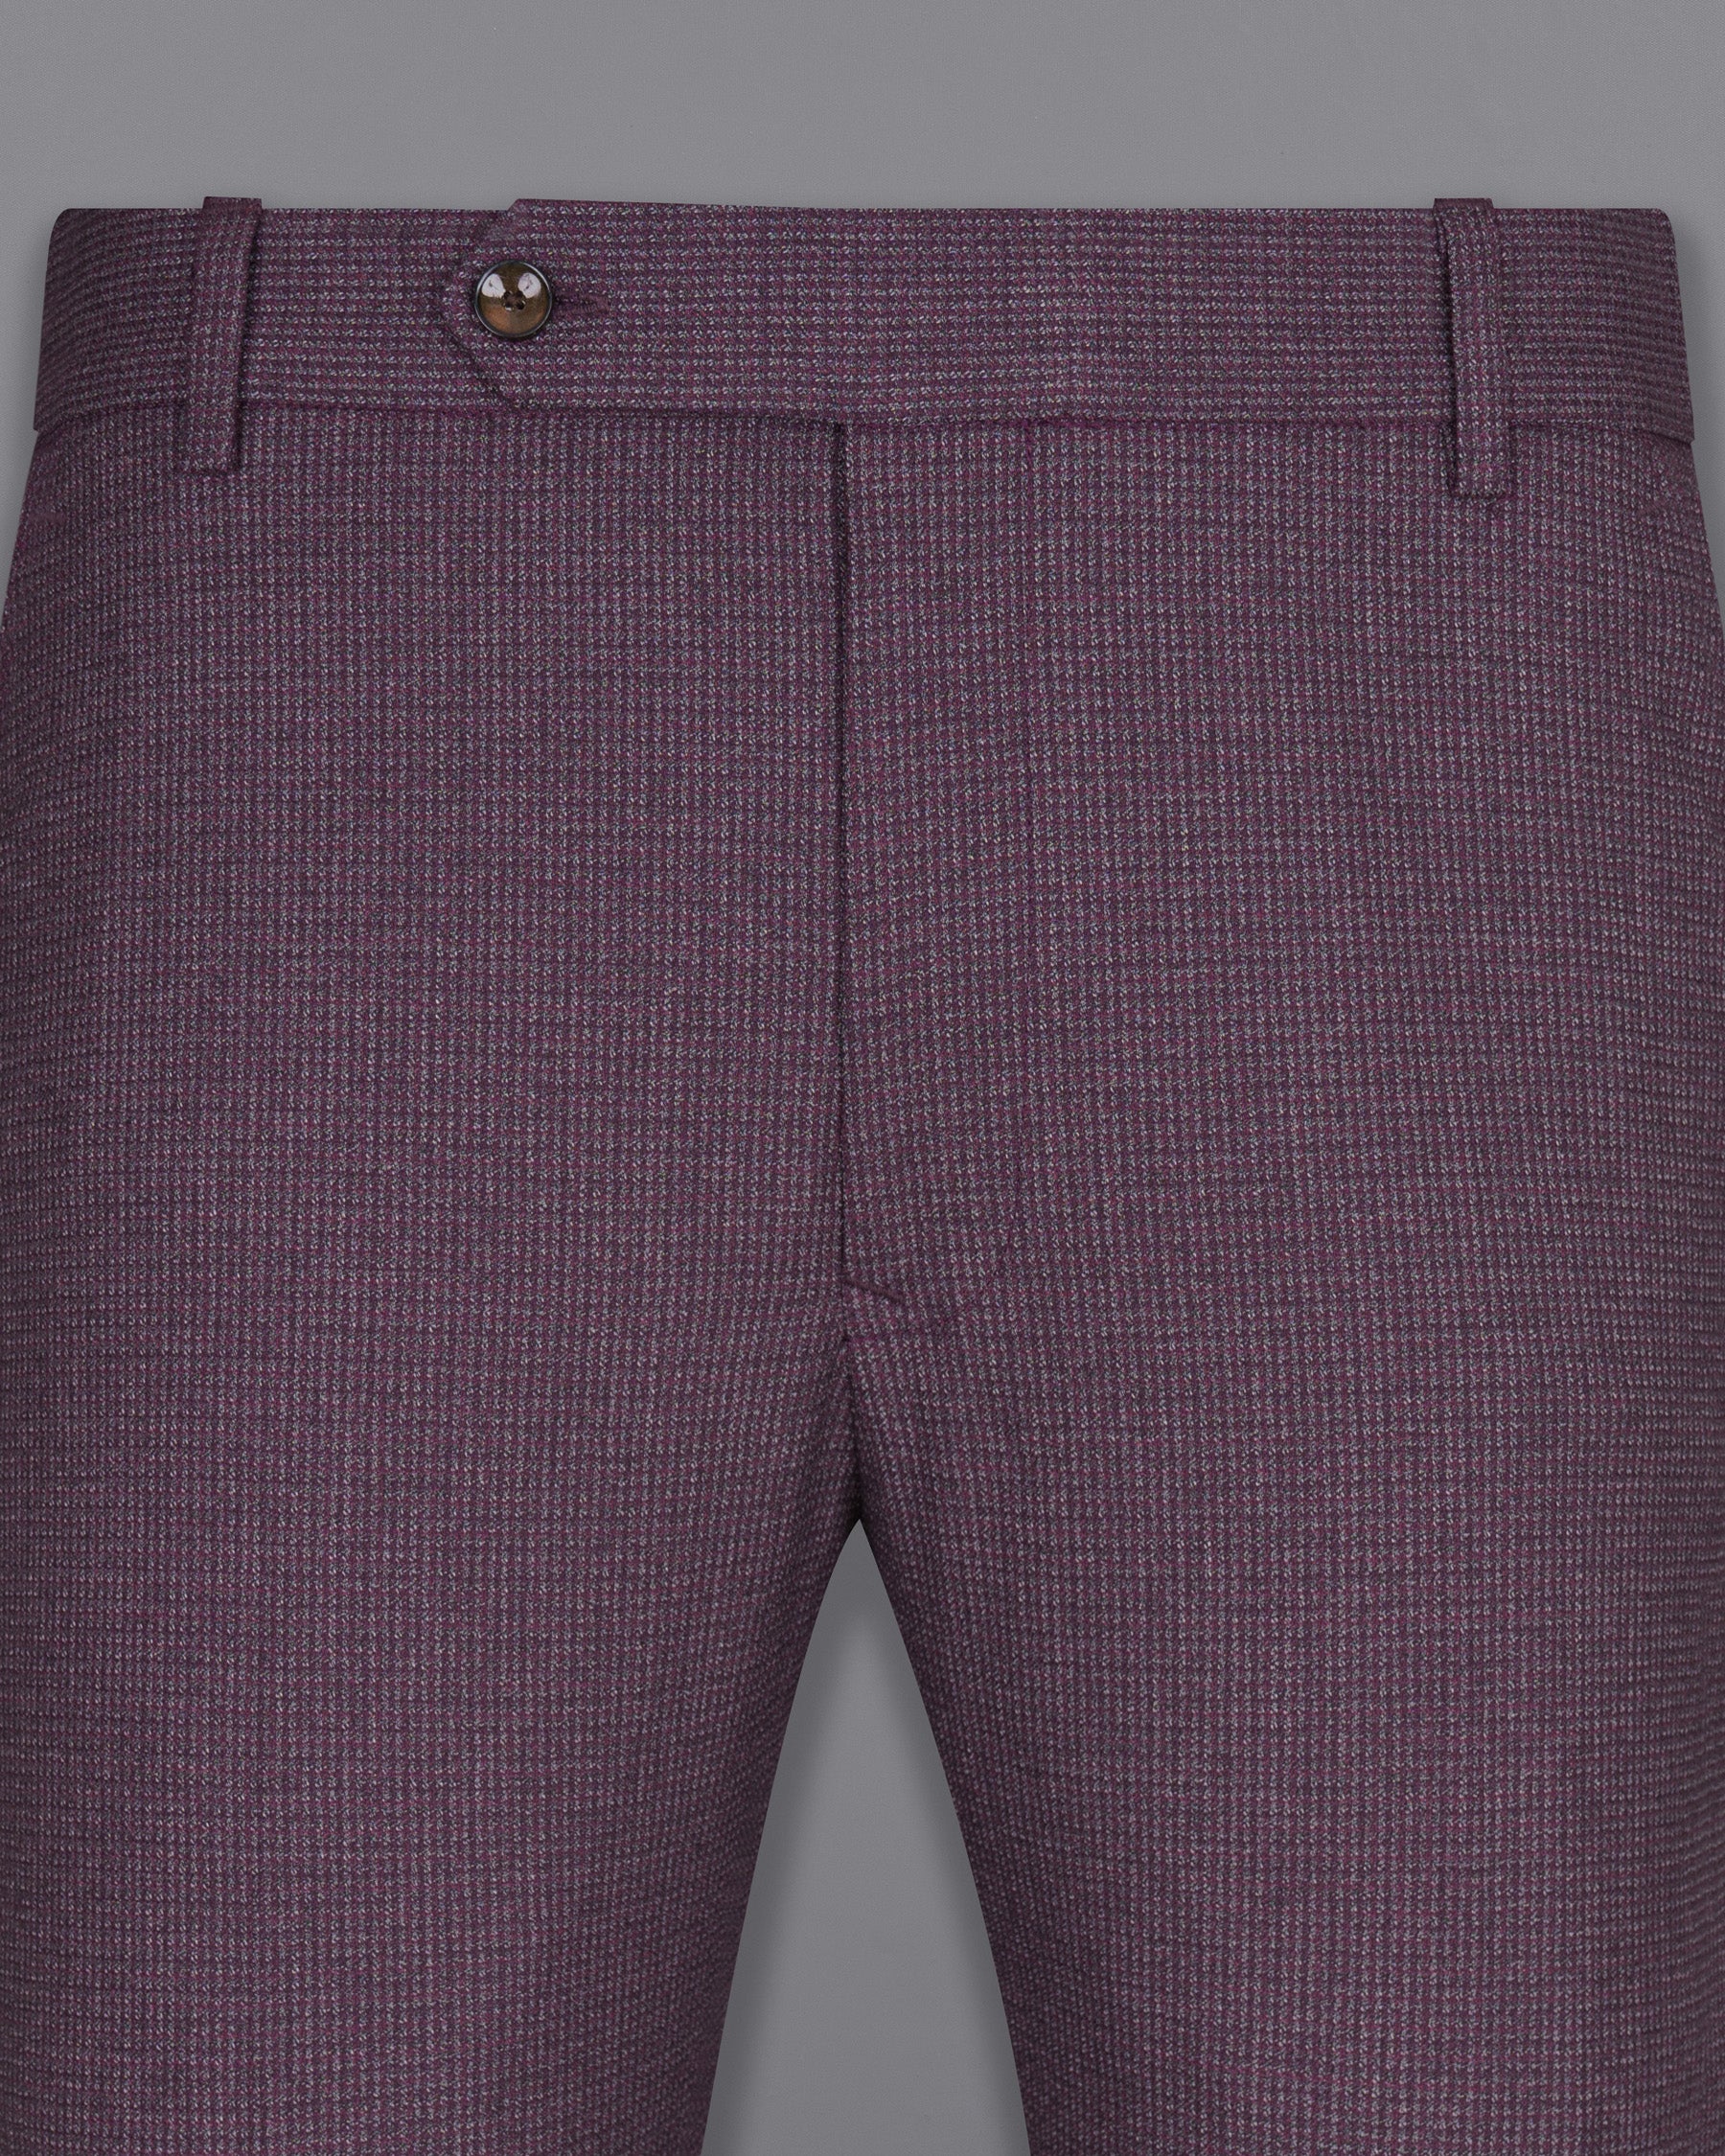 Burgandy with Grey Woolrich Pant T1432-28, T1432-30, T1432-32, T1432-34, T1432-36, T1432-38, T1432-40, T1432-42, T1432-44